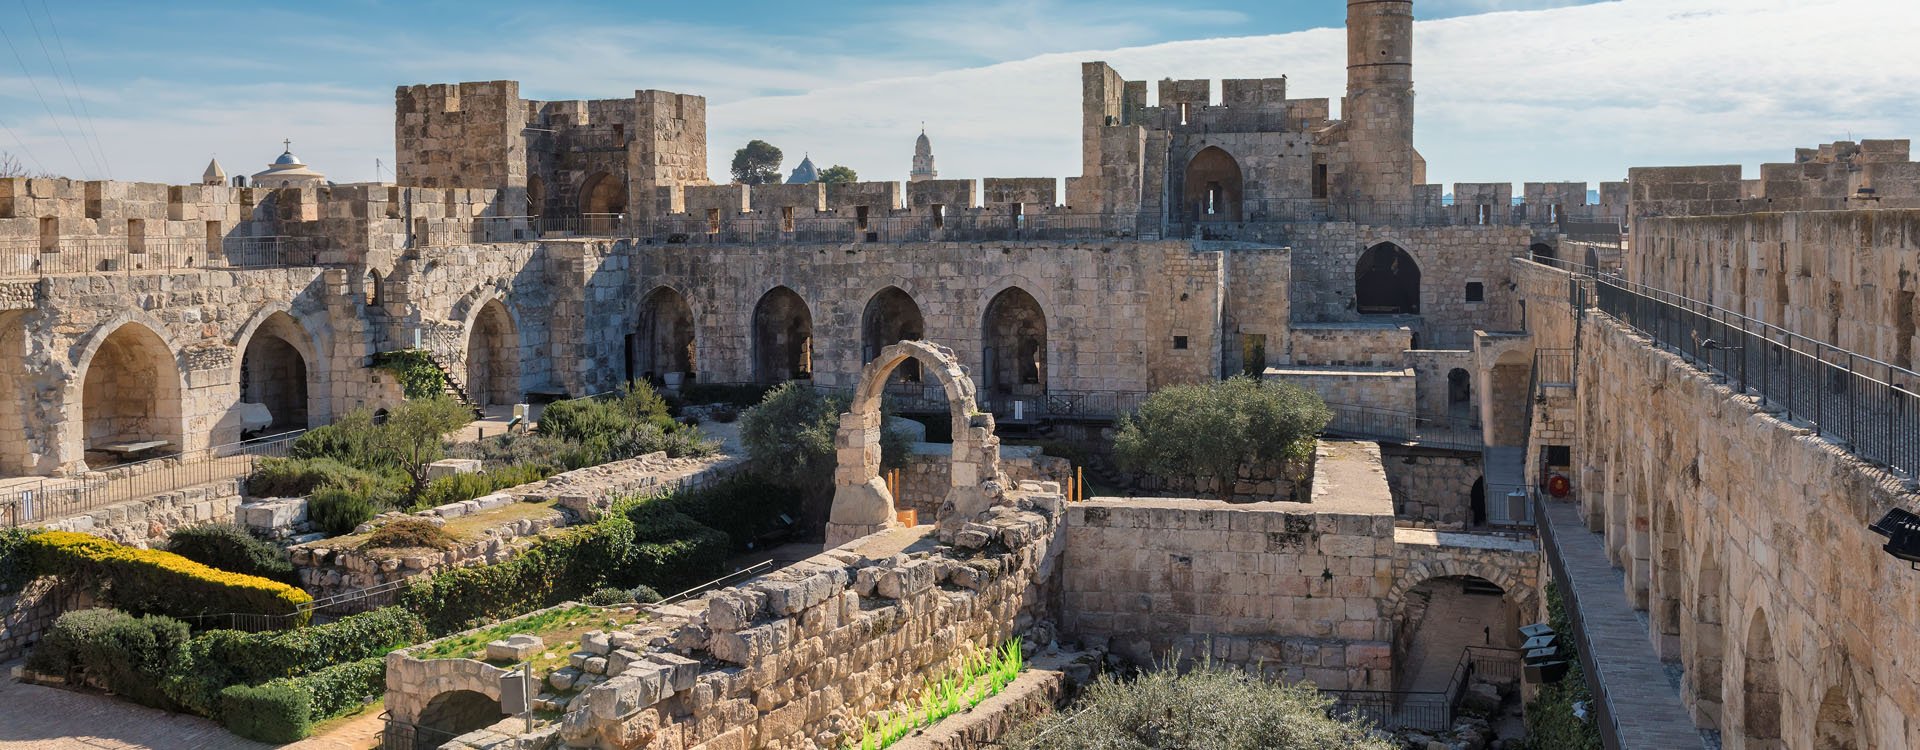 Panoramic view of David's tower at spring time in old city of Jerusalem, Israel